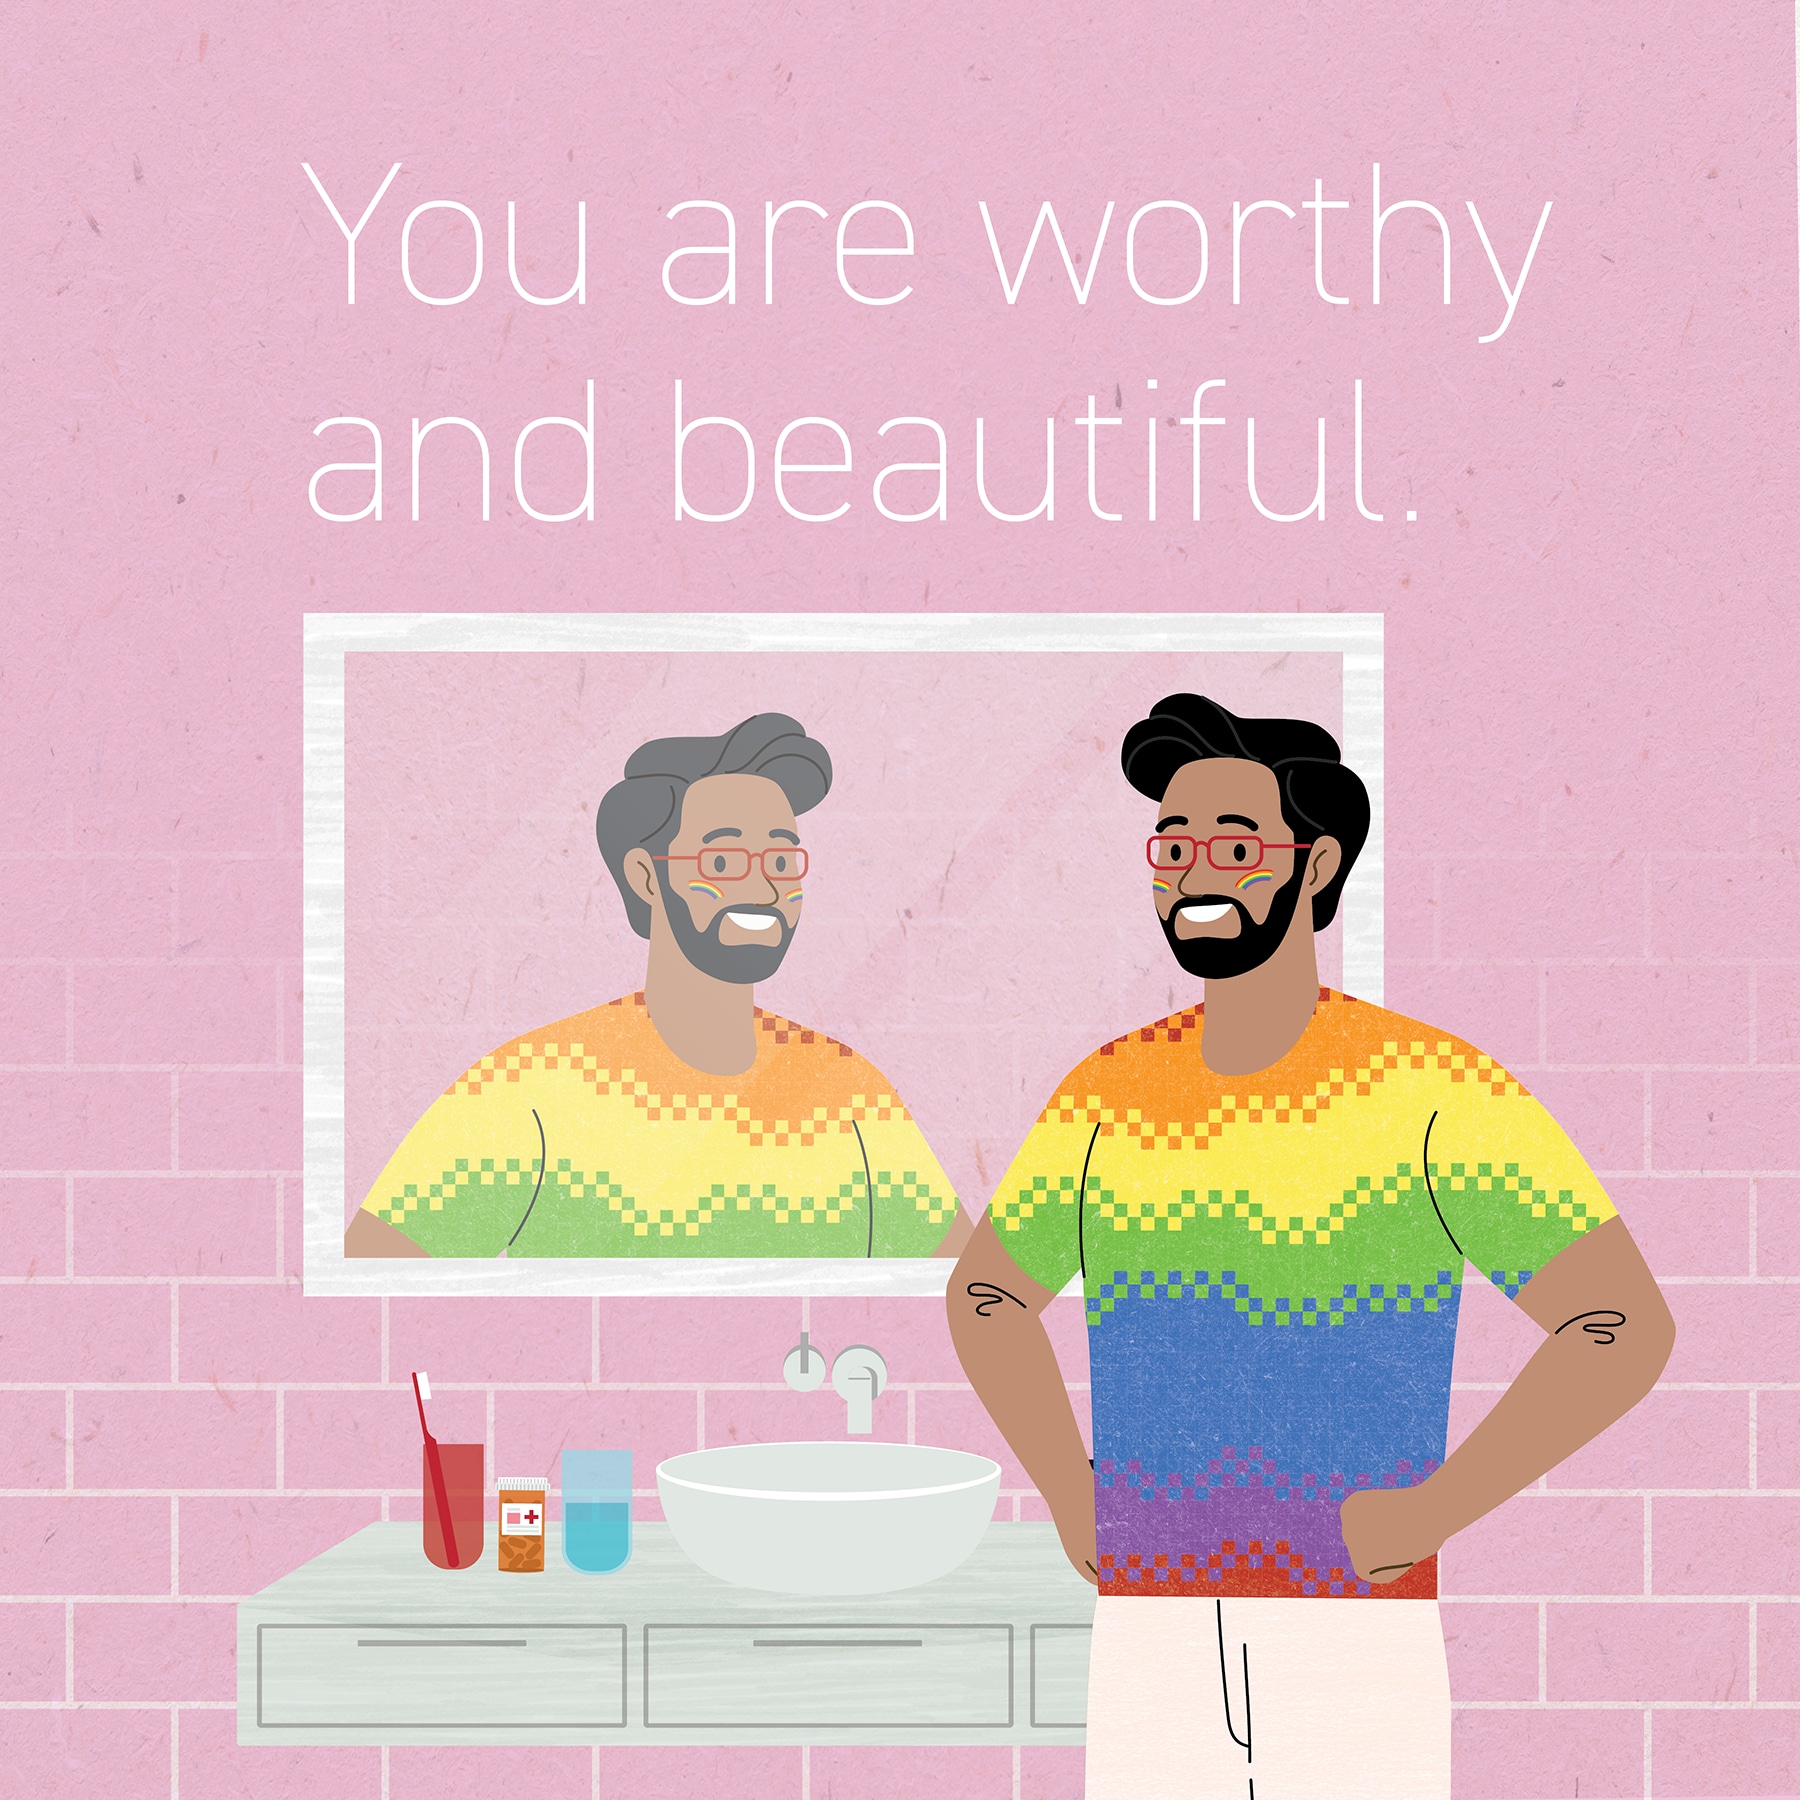 You are worthy and beautiful.